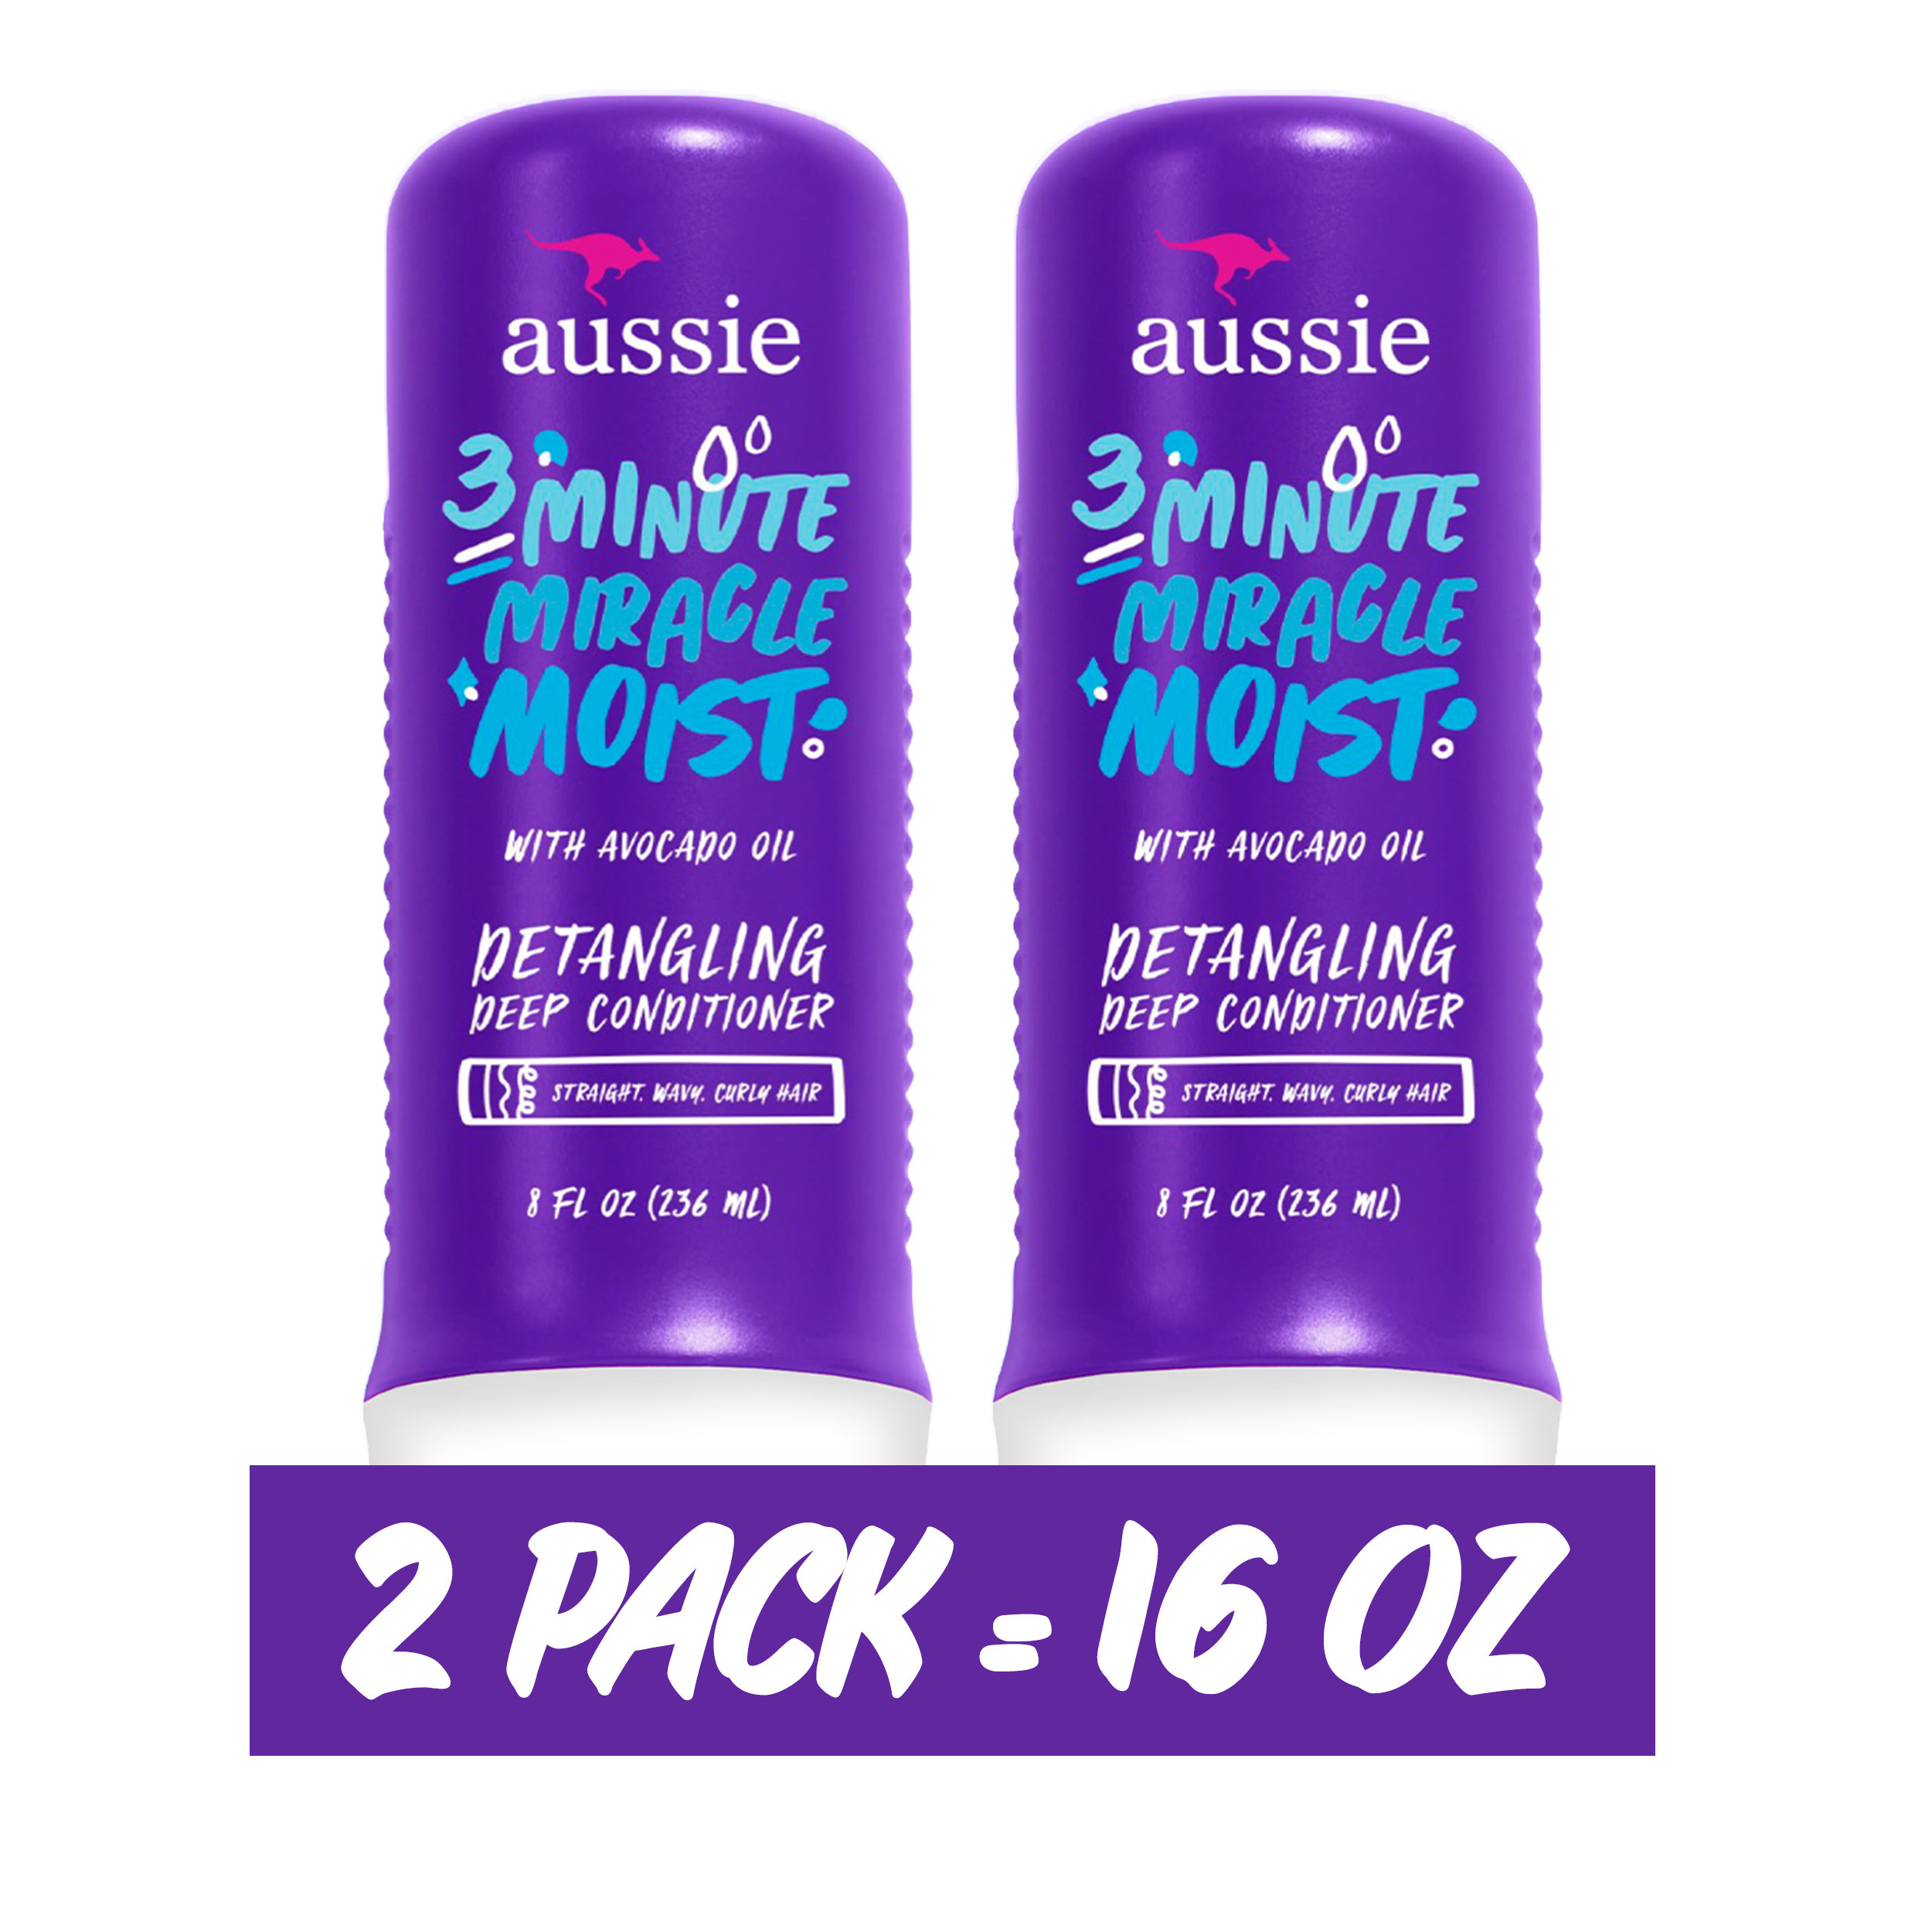 Aussie 3 Minute Miracle Moist Conditioner, Paraben Free, Twin Pk, 8.0 fl oz. for All Hair Types - image 3 of 12